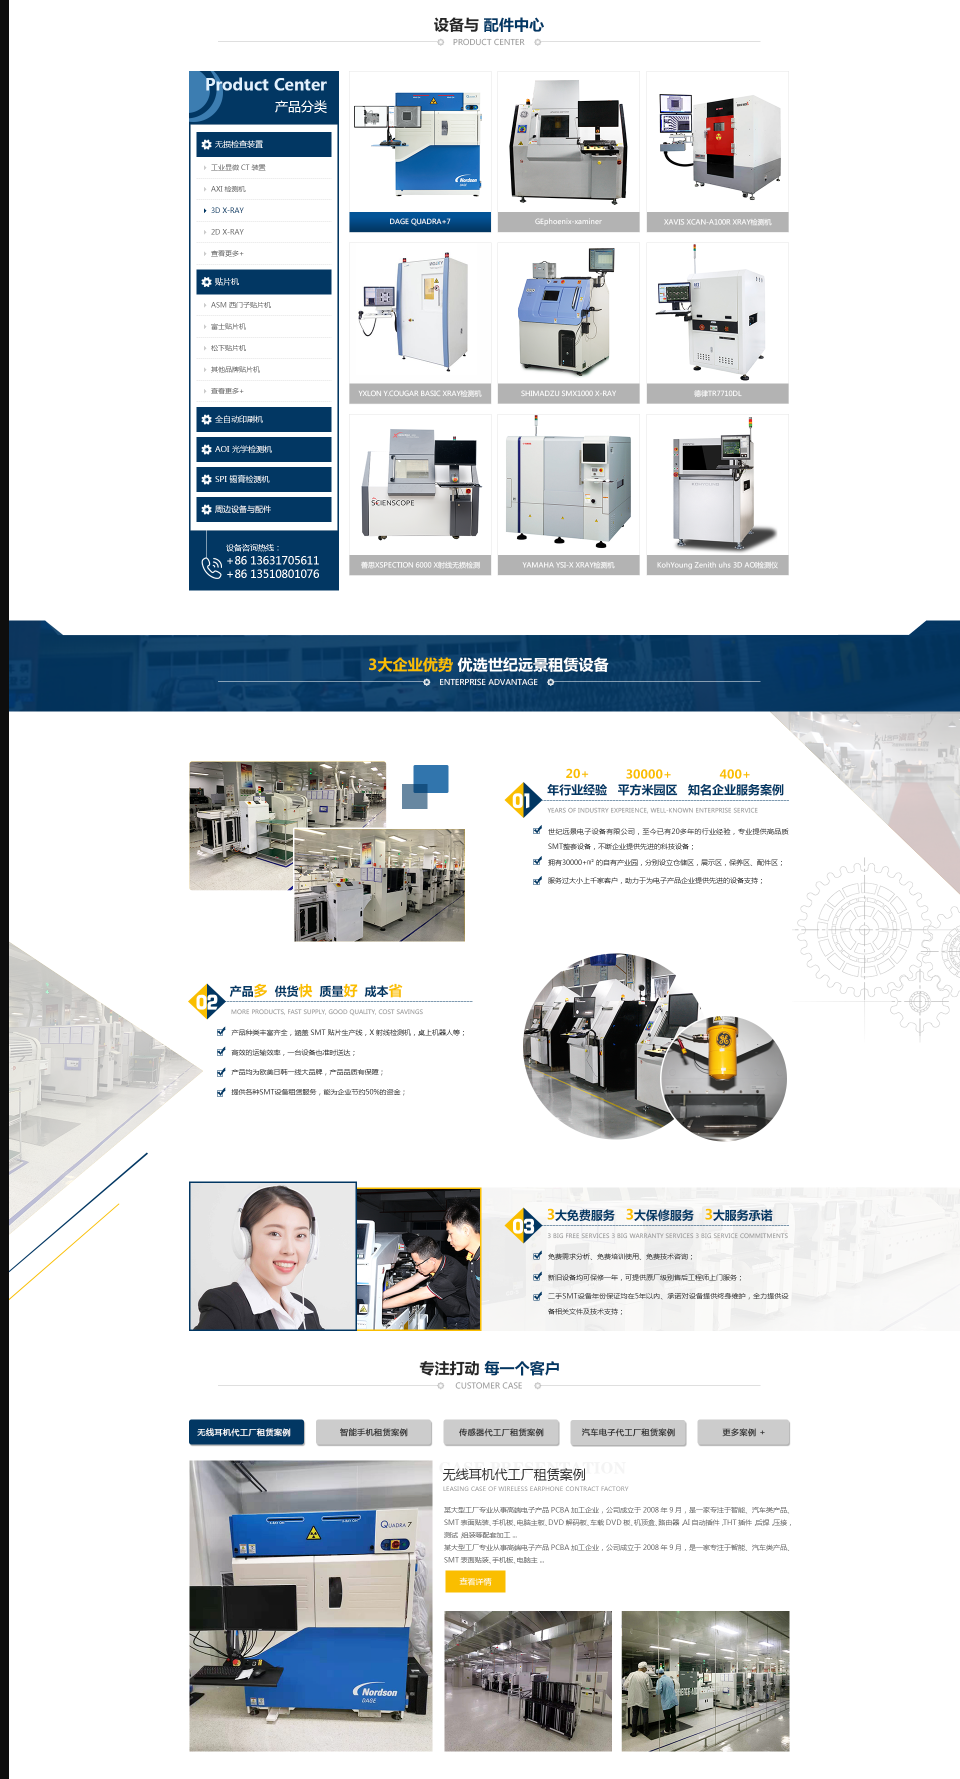 Used X-ray flaw detector and X-ray testing machine rental technology is mature, compatibility is good, and purchase with confidence